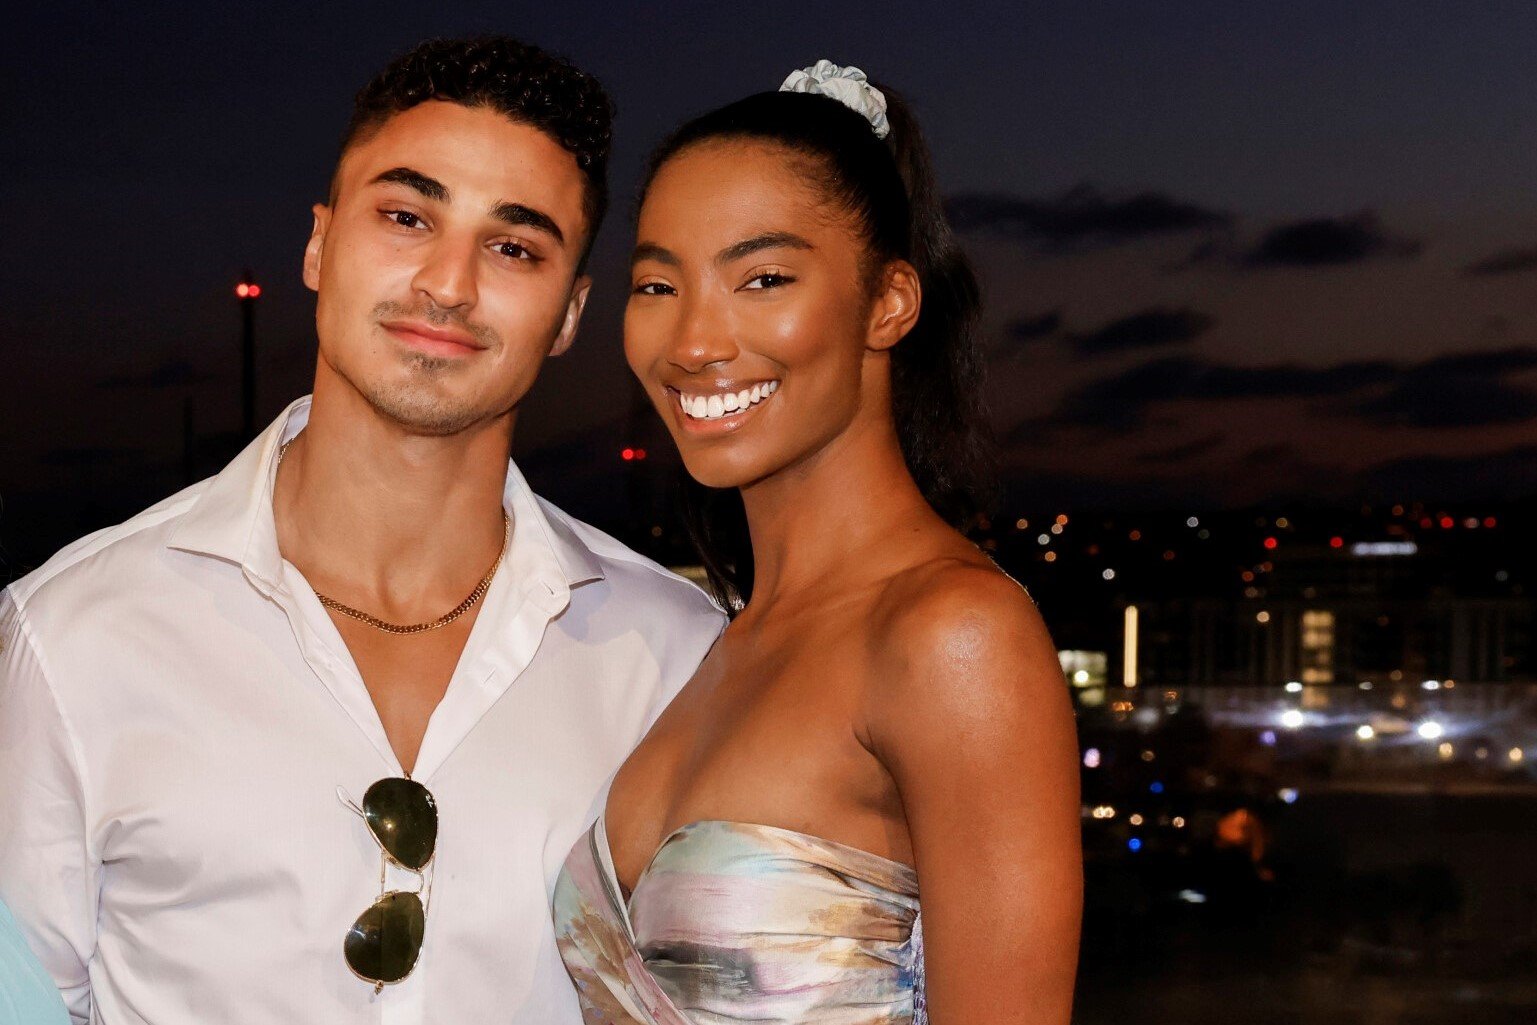 Joseph Abdin and Taylor Hale, who starred in 'Big Brother 24' on CBS, pose for a picture. Joseph wears a white button-up shirt and gold chain. Taylor wears a light pink, blue, and brown strapless dress.